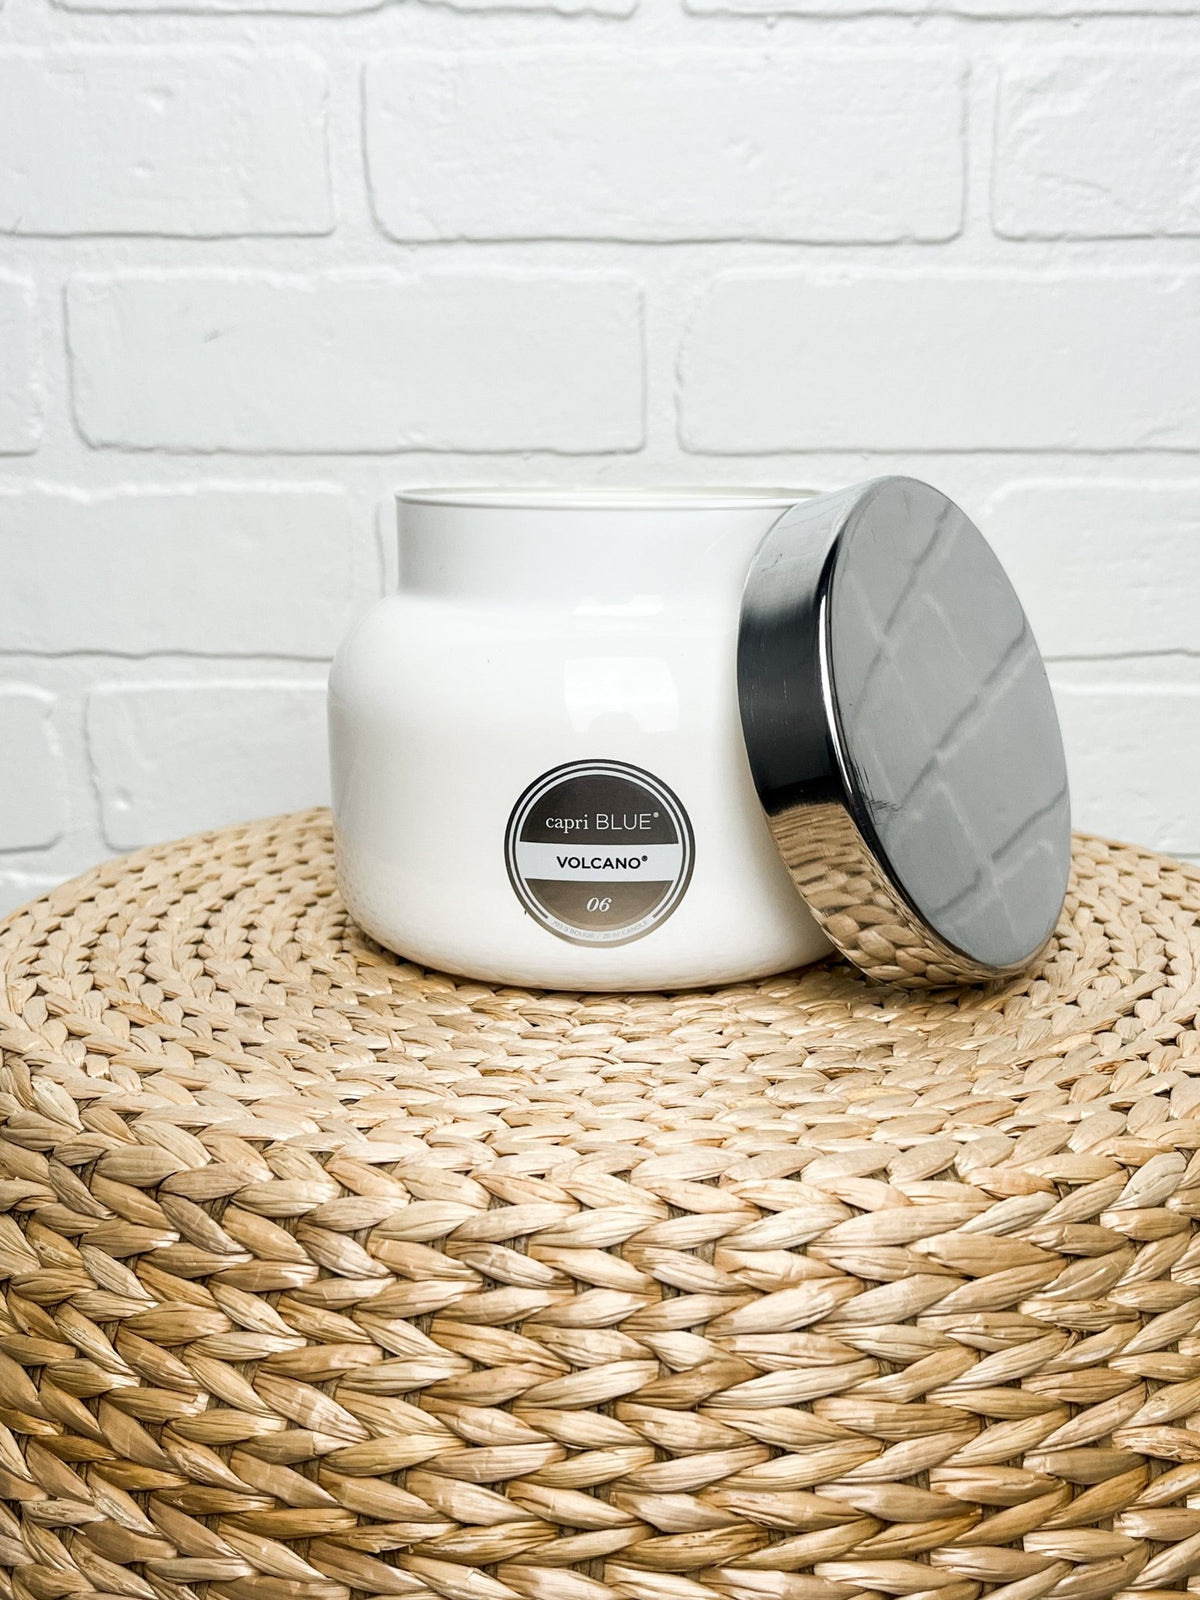 Capri Blue volcano scent 28oz signature candle white - Trendy Candles and Scents at Lush Fashion Lounge Boutique in Oklahoma City